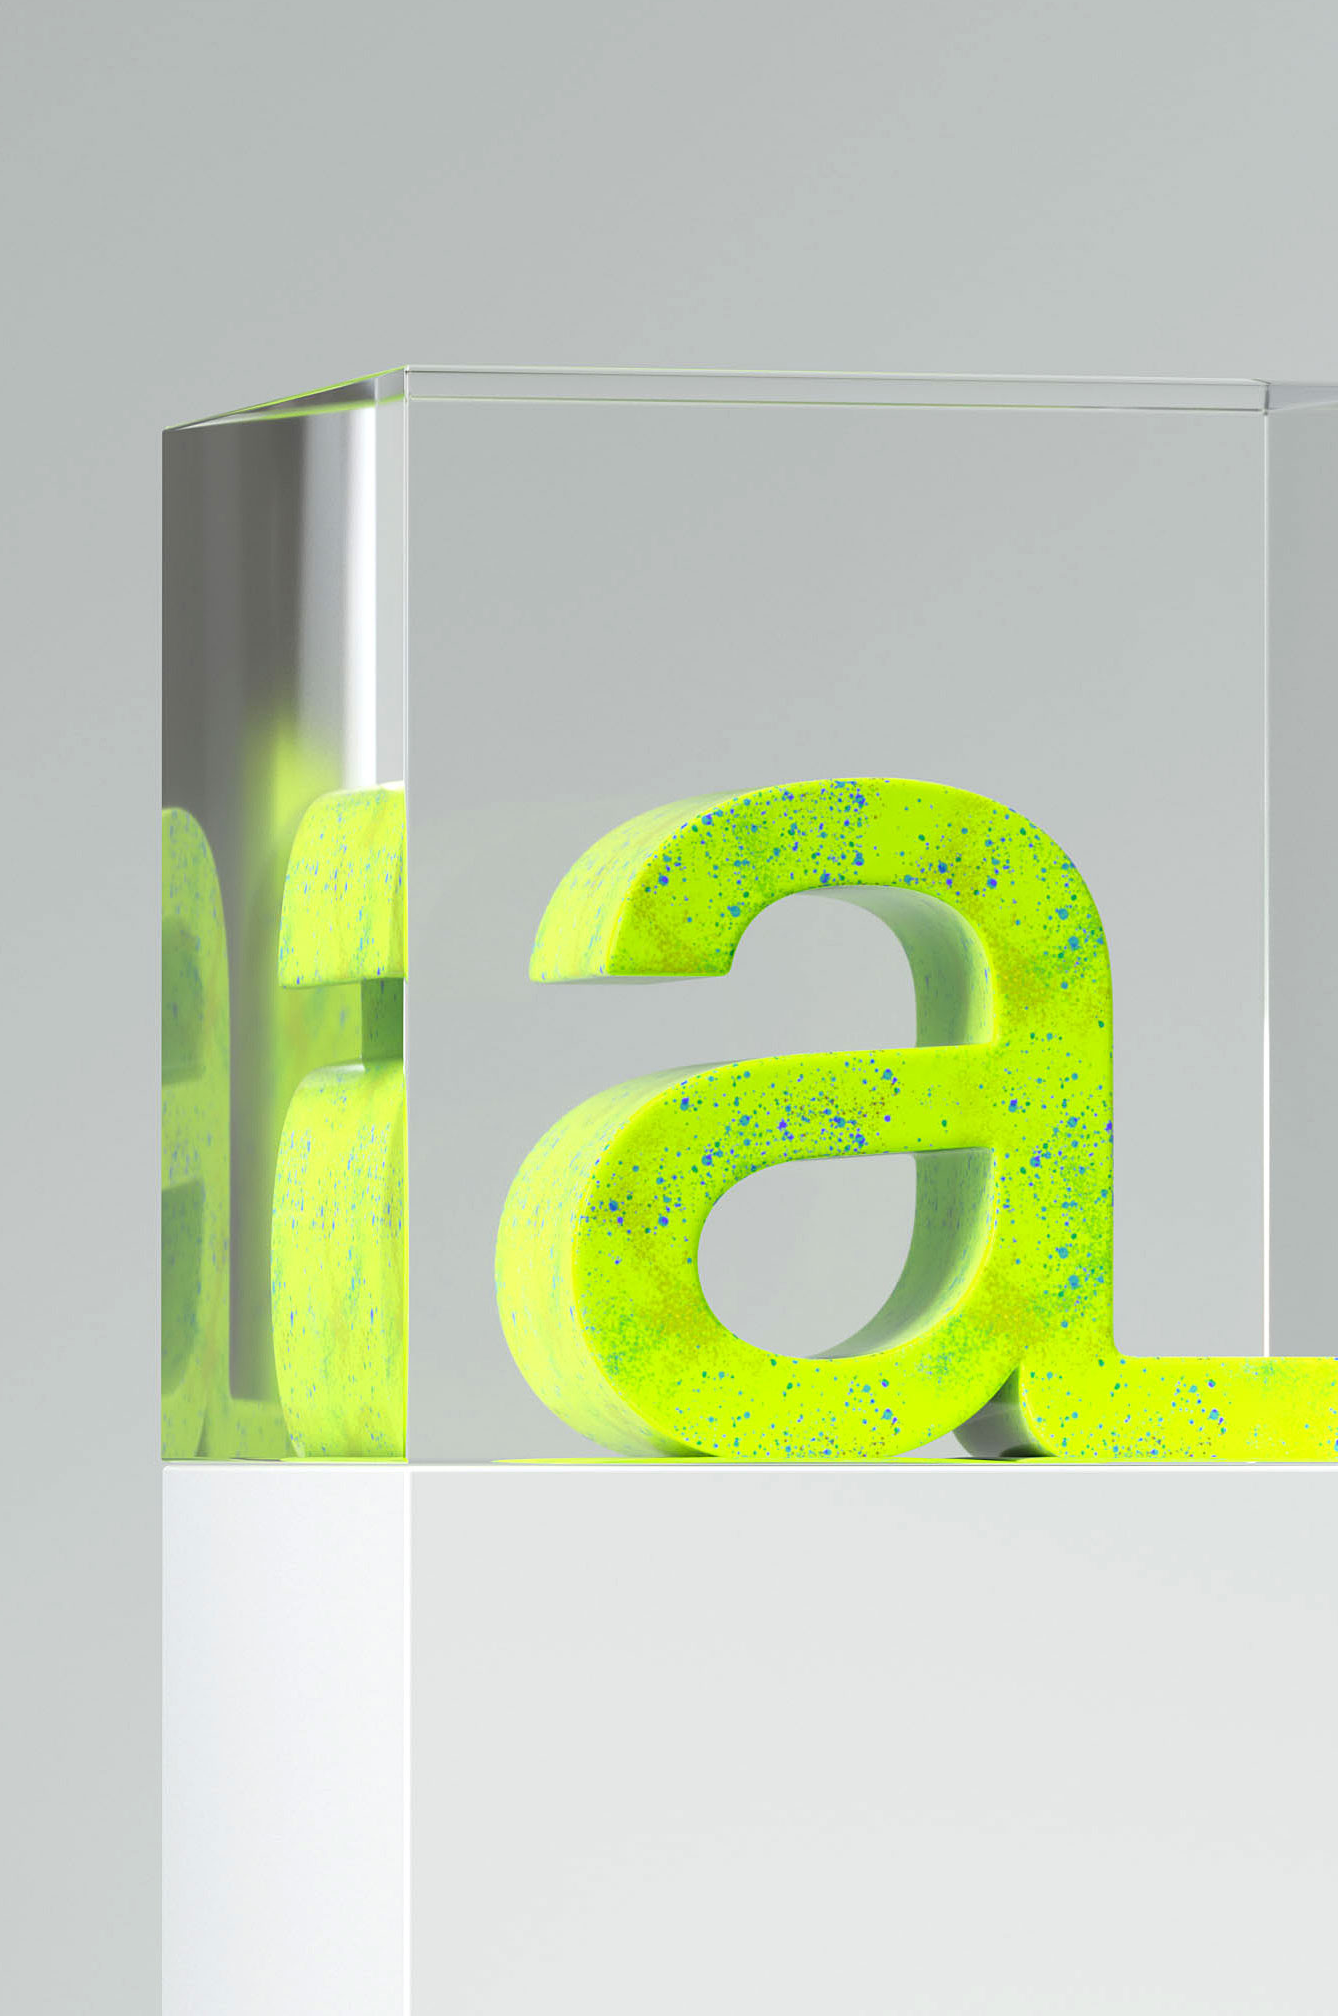 Entrance image - showcasing a 3D Arkive logo framed in class on a plinth